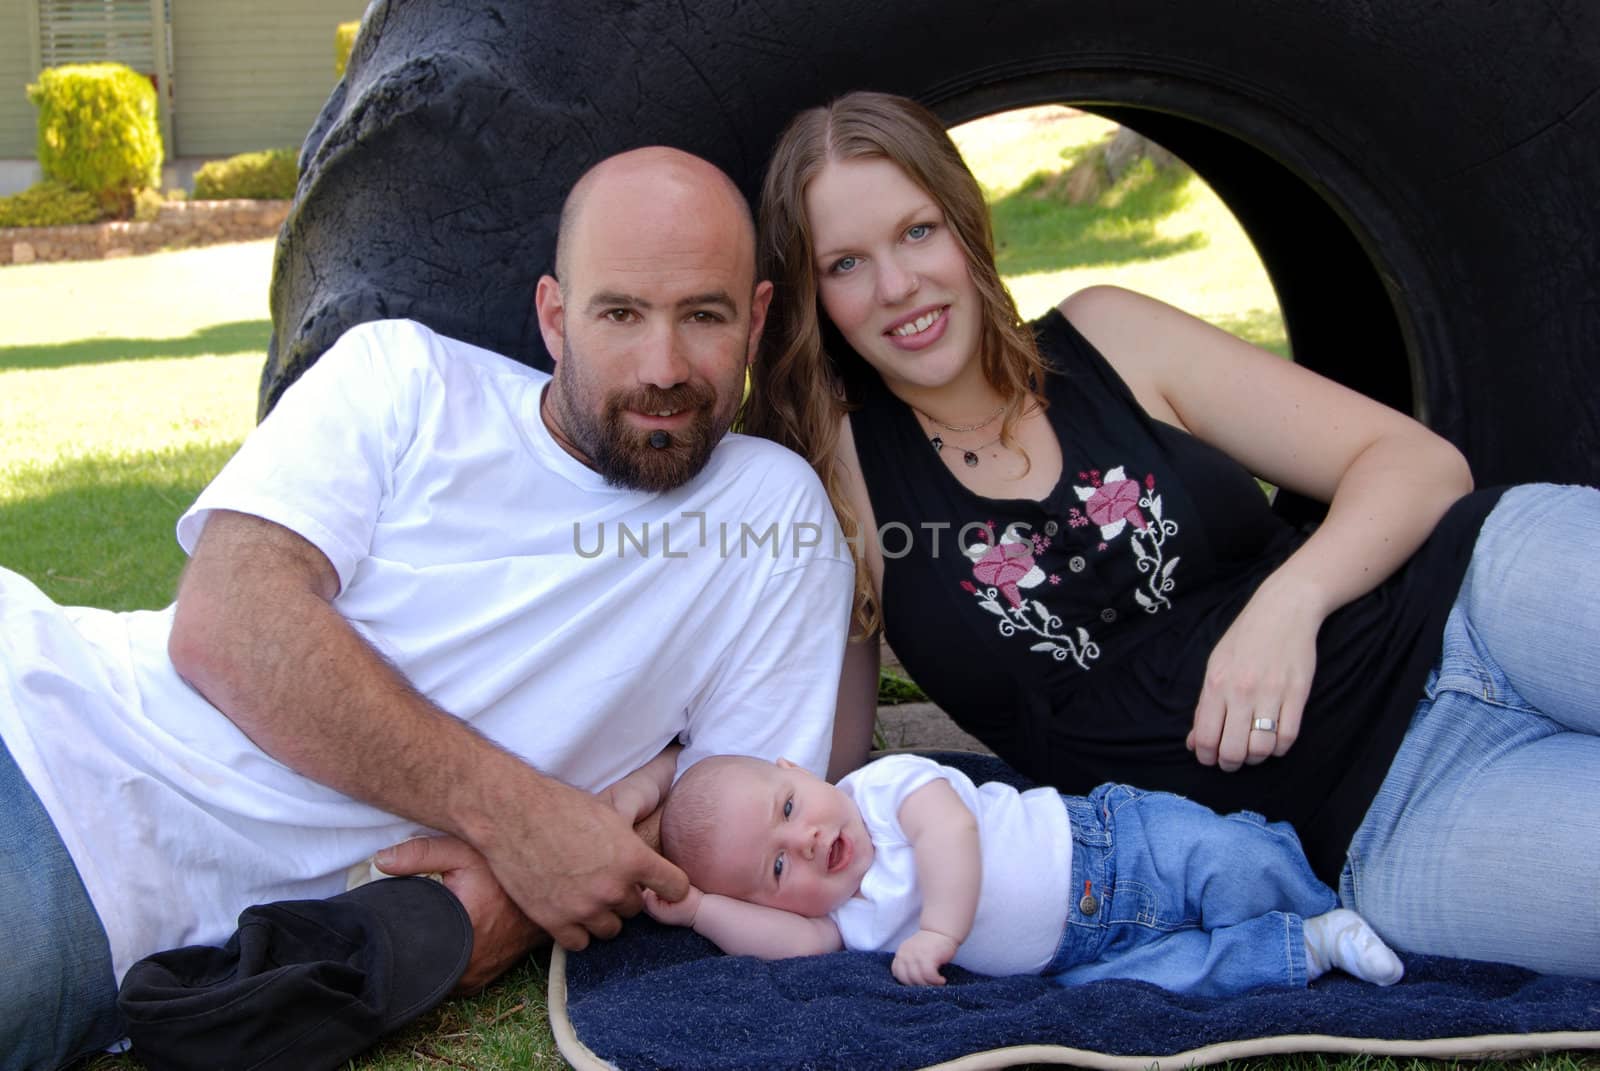 Horizontal image of a young modern family of three enjoying a casual day in the park.
